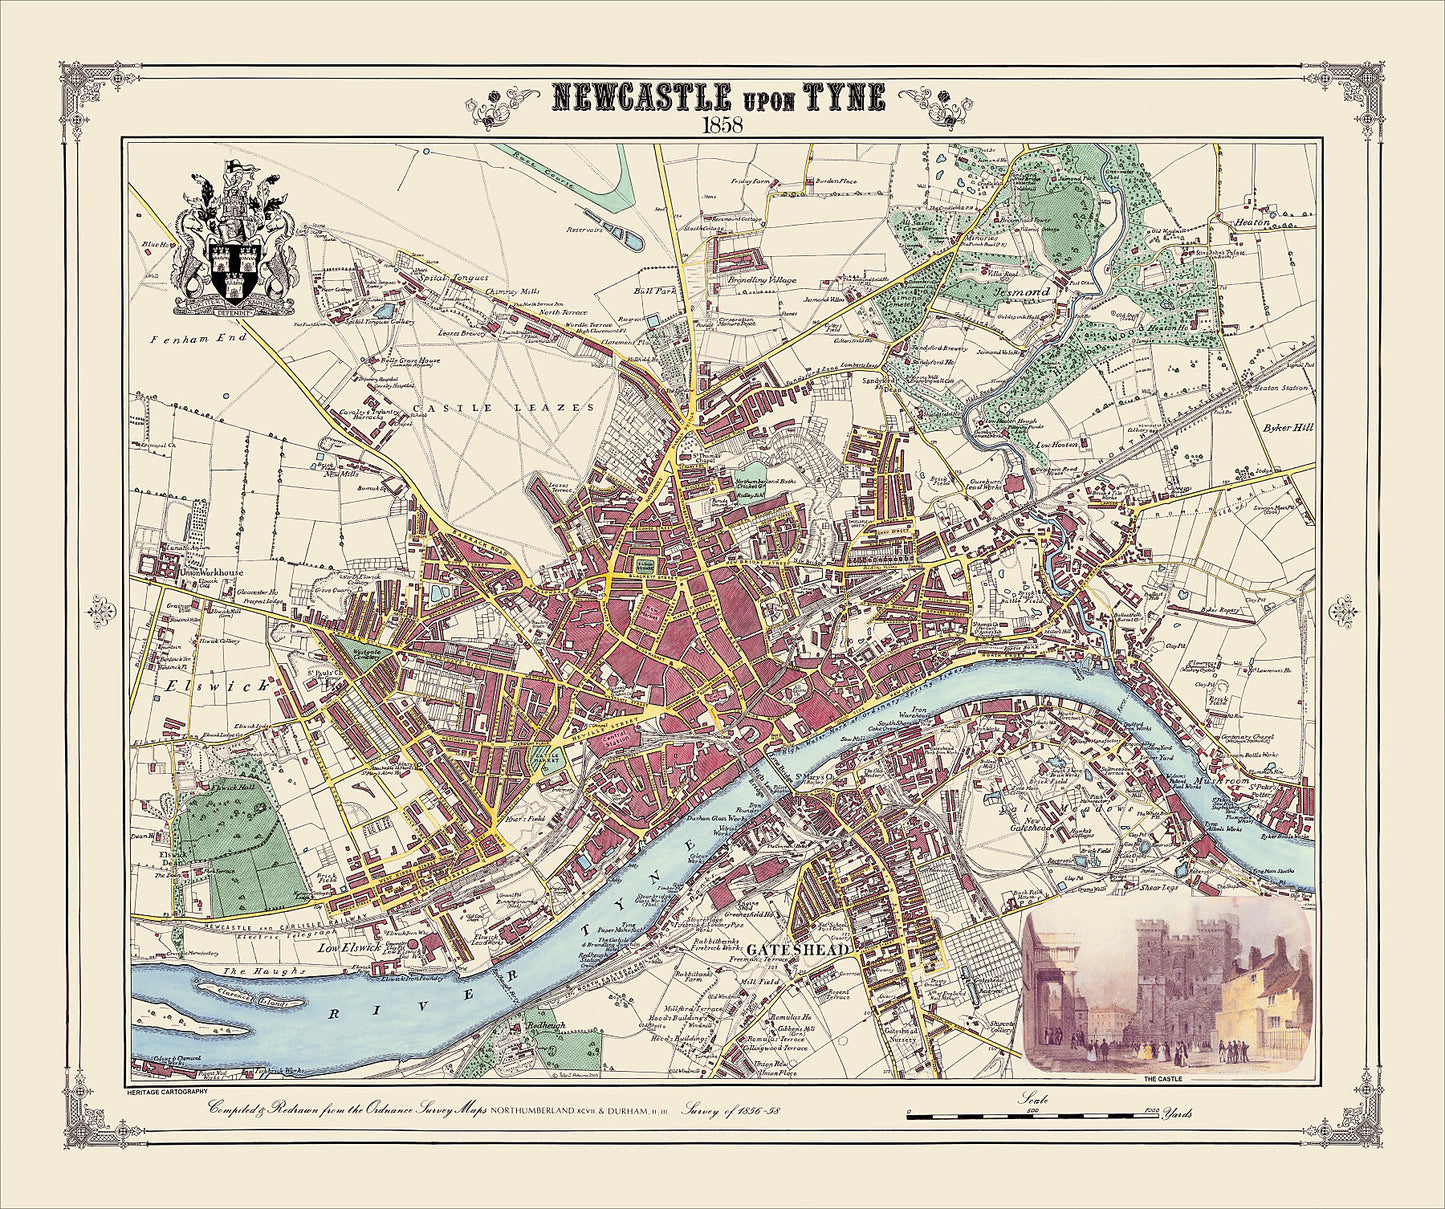 Coloured Victorian map of Newcastle upon Tyne in 1858 by Peter J Adams of Heritage Cartography